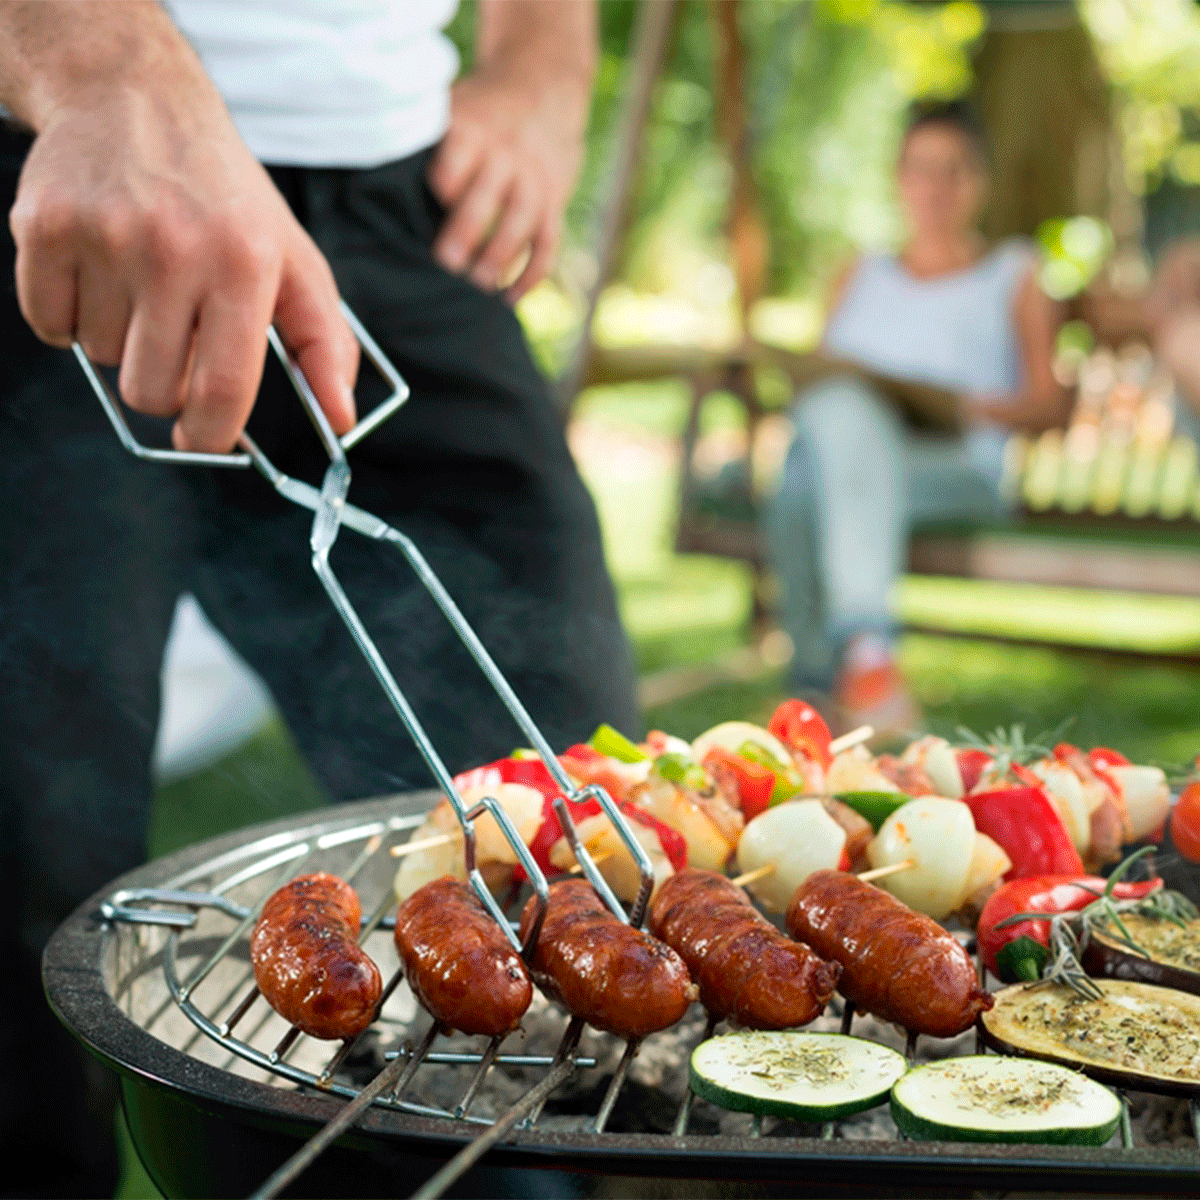 15 Tips for the Perfect Labor Day BBQ | The Family Handyman